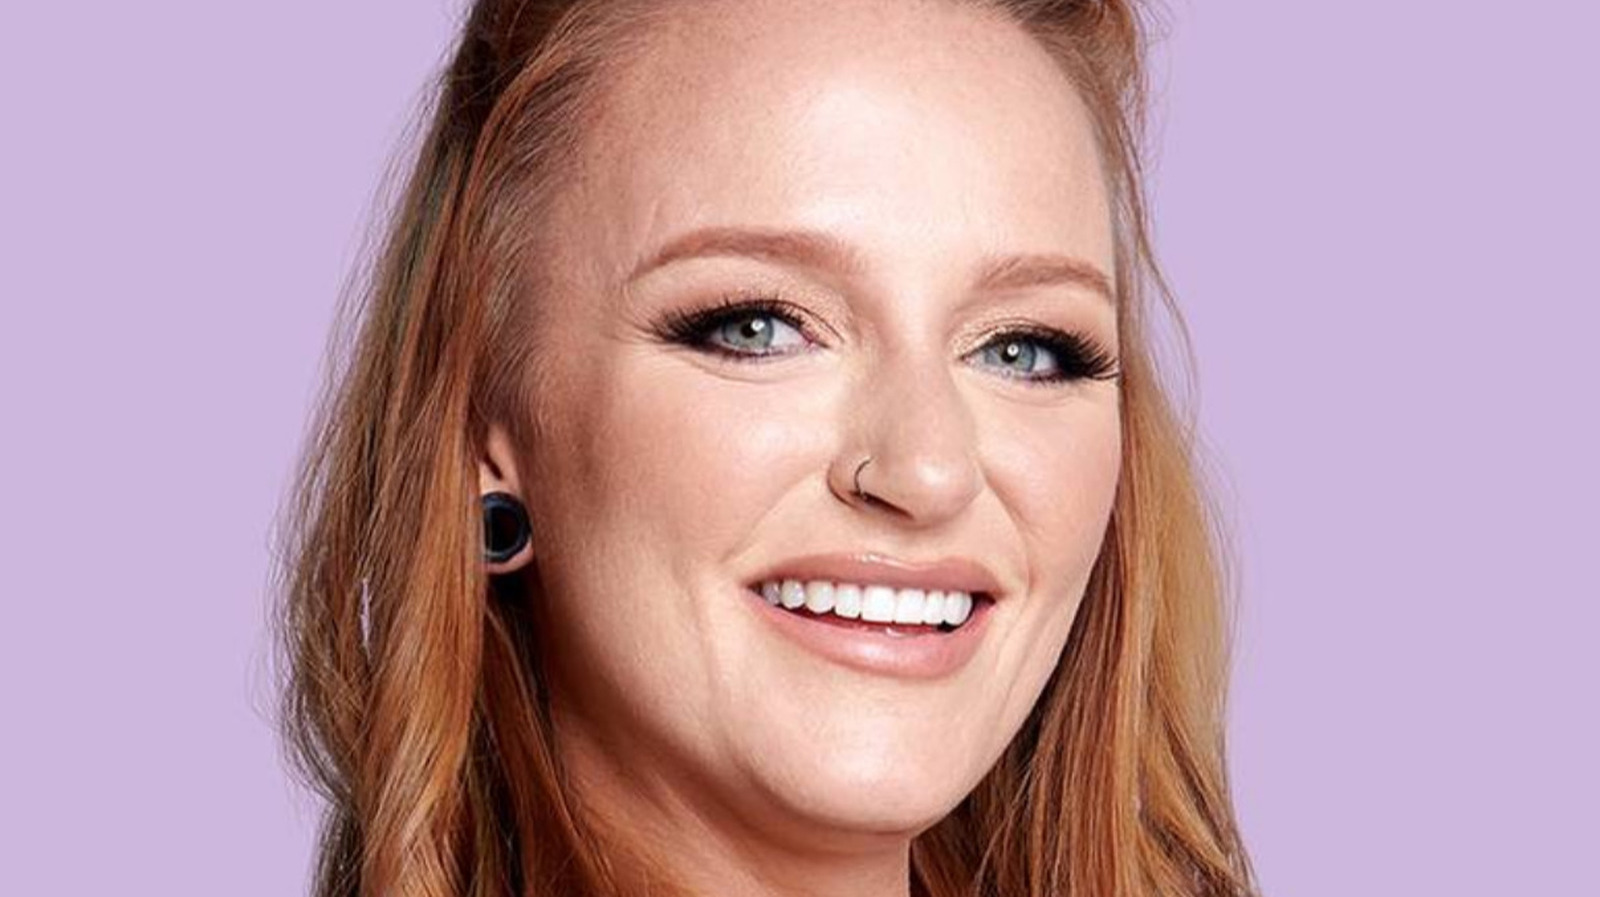 Teen Mom's Maci Bookout Defends Putting Son Bentley's Therapy On TV